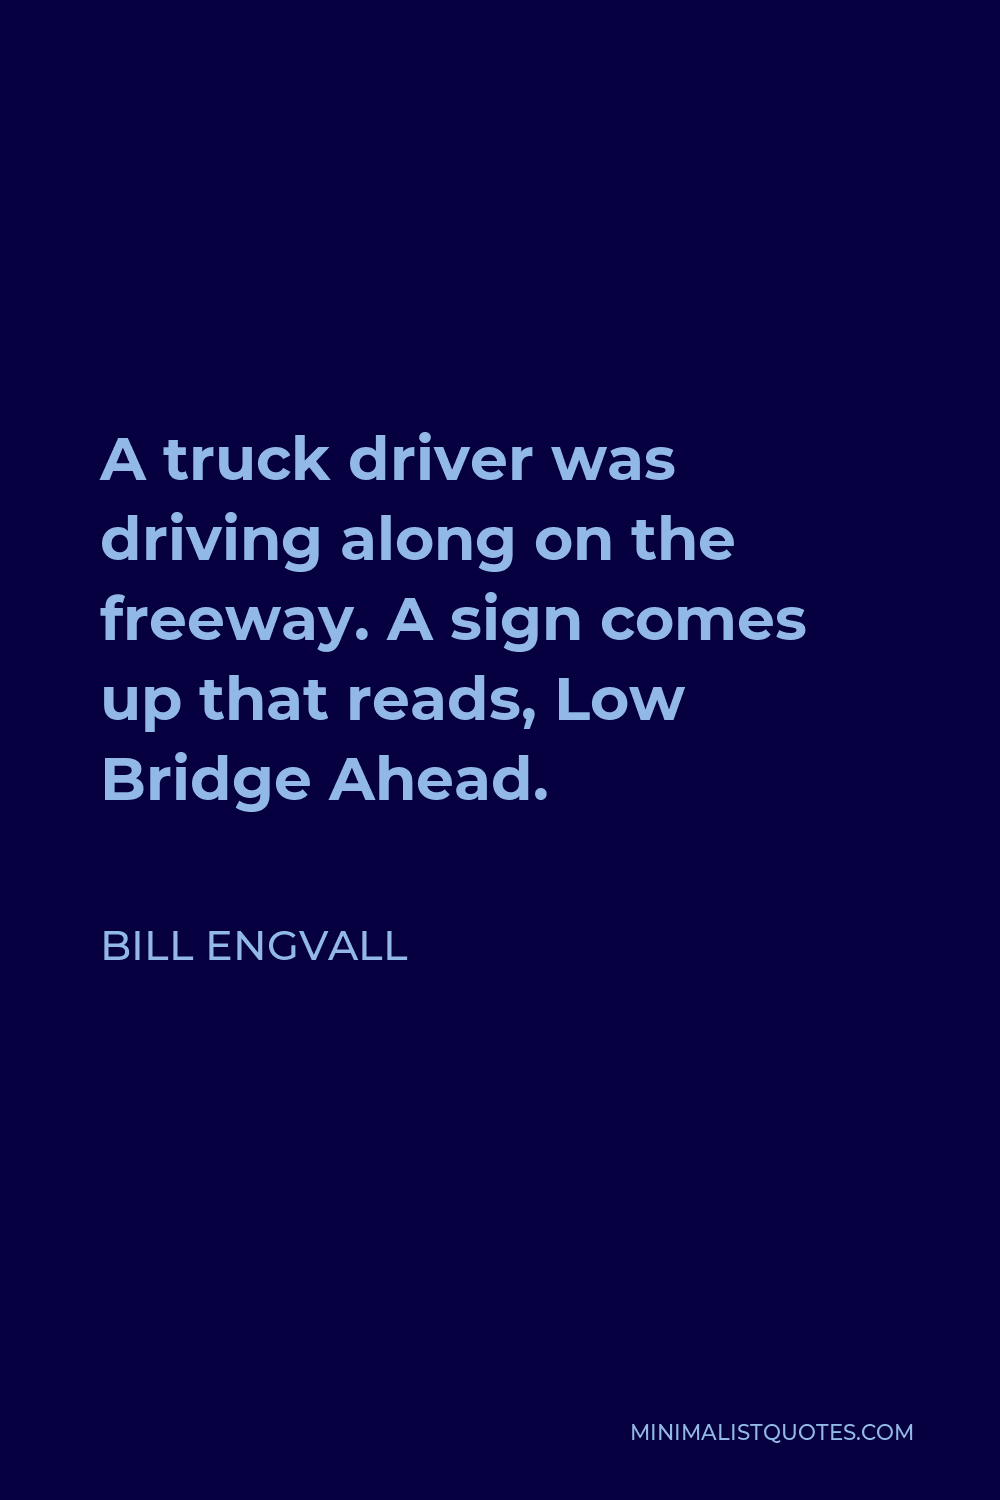 Bill Engvall Quote - A truck driver was driving along on the freeway. A sign comes up that reads, Low Bridge Ahead.